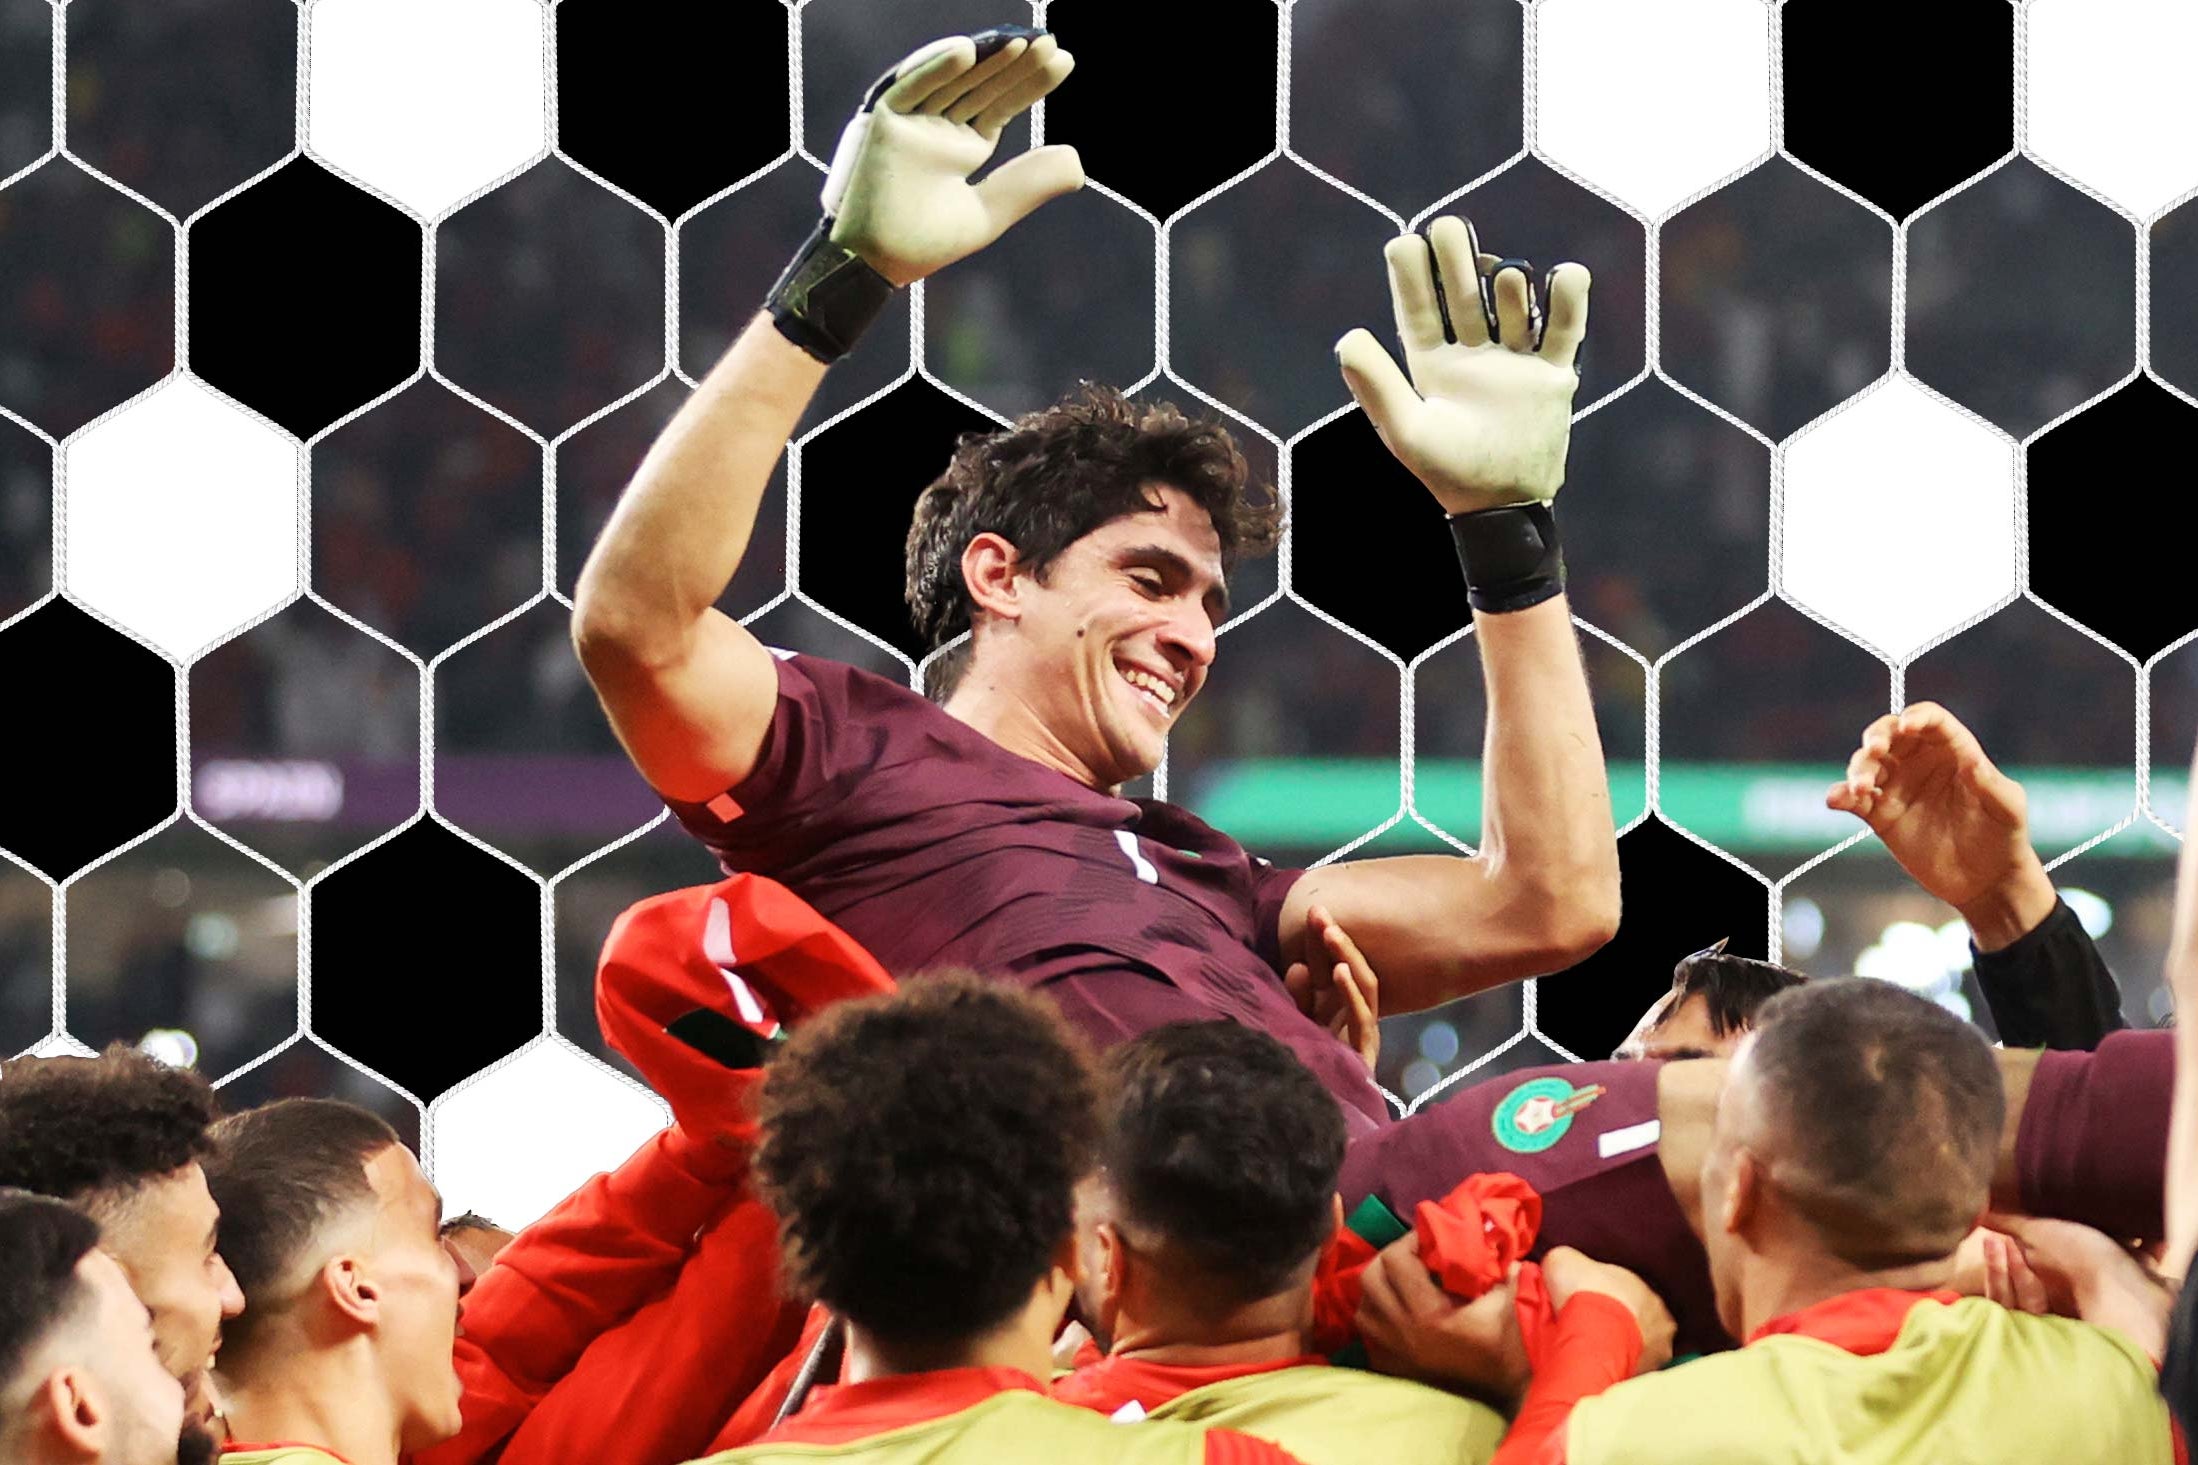 Morocco players hold their goalie above their heads in celebration